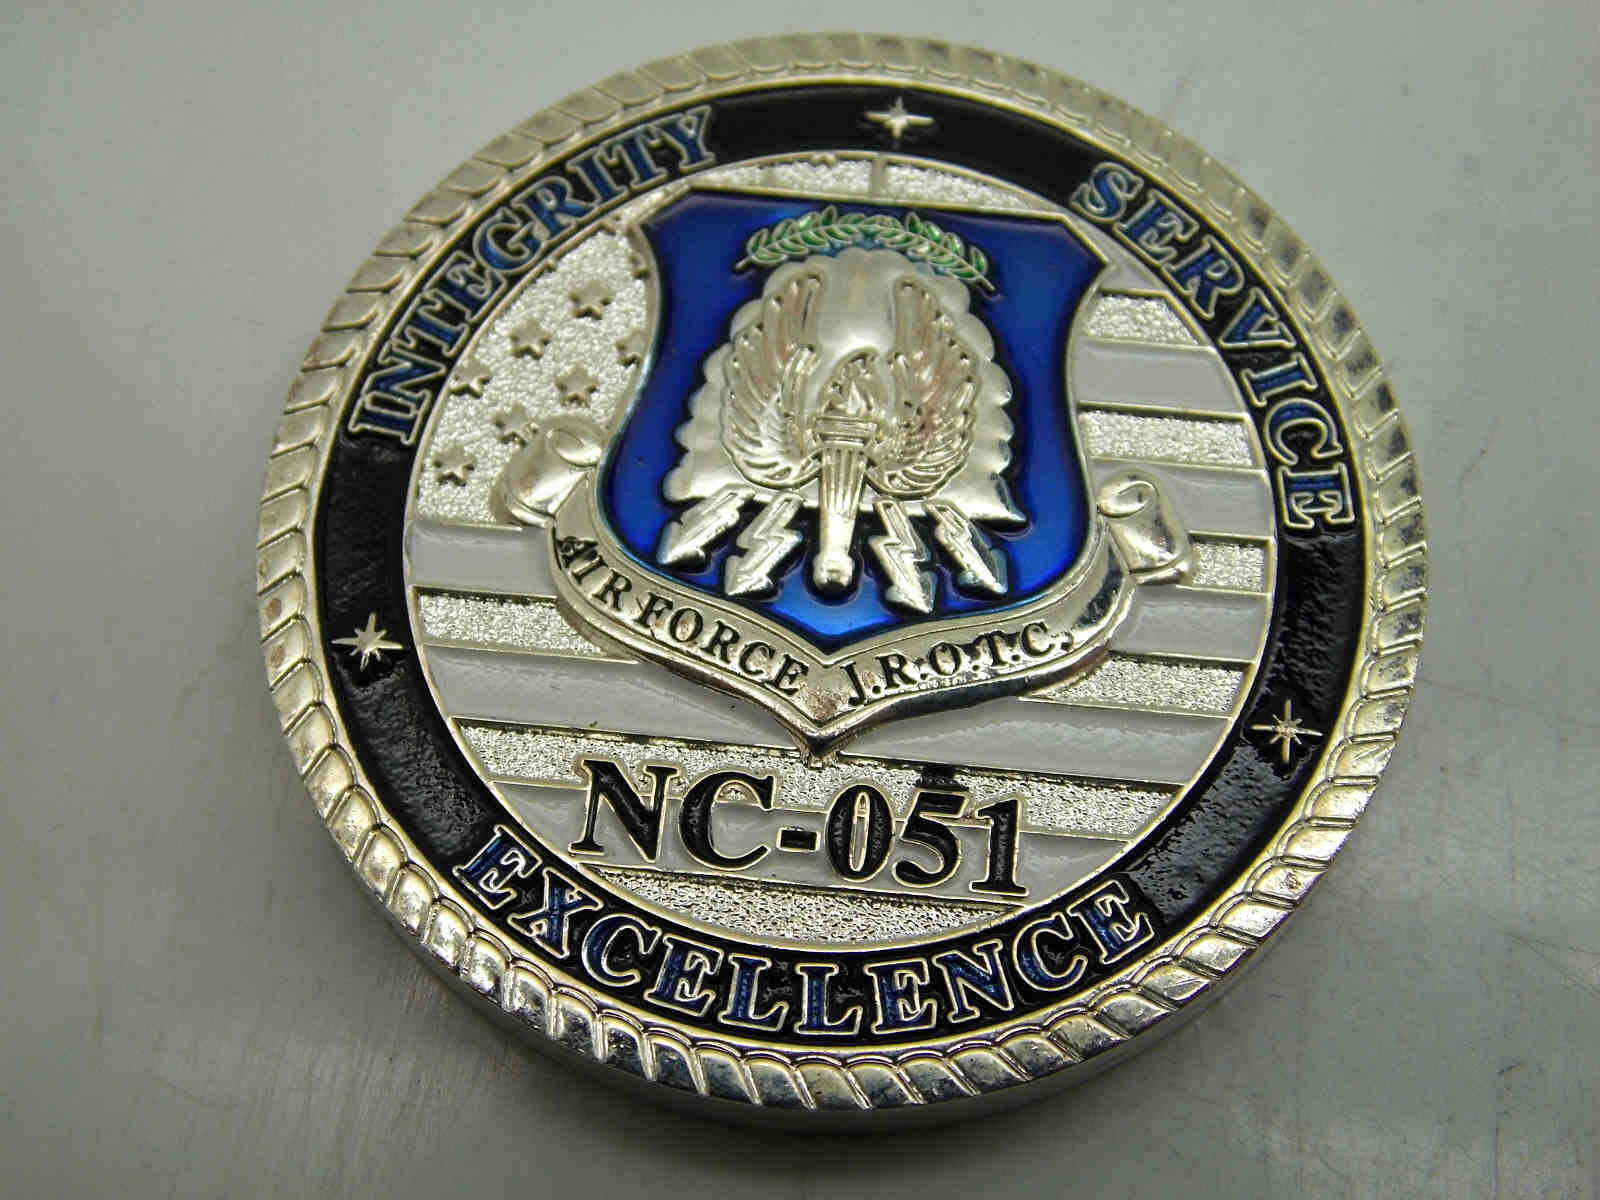 AIR FORCE J.R.O.T.C. NC-051 CENTRAL CABARRUS WEST CABARRUS CHALLENGE COIN